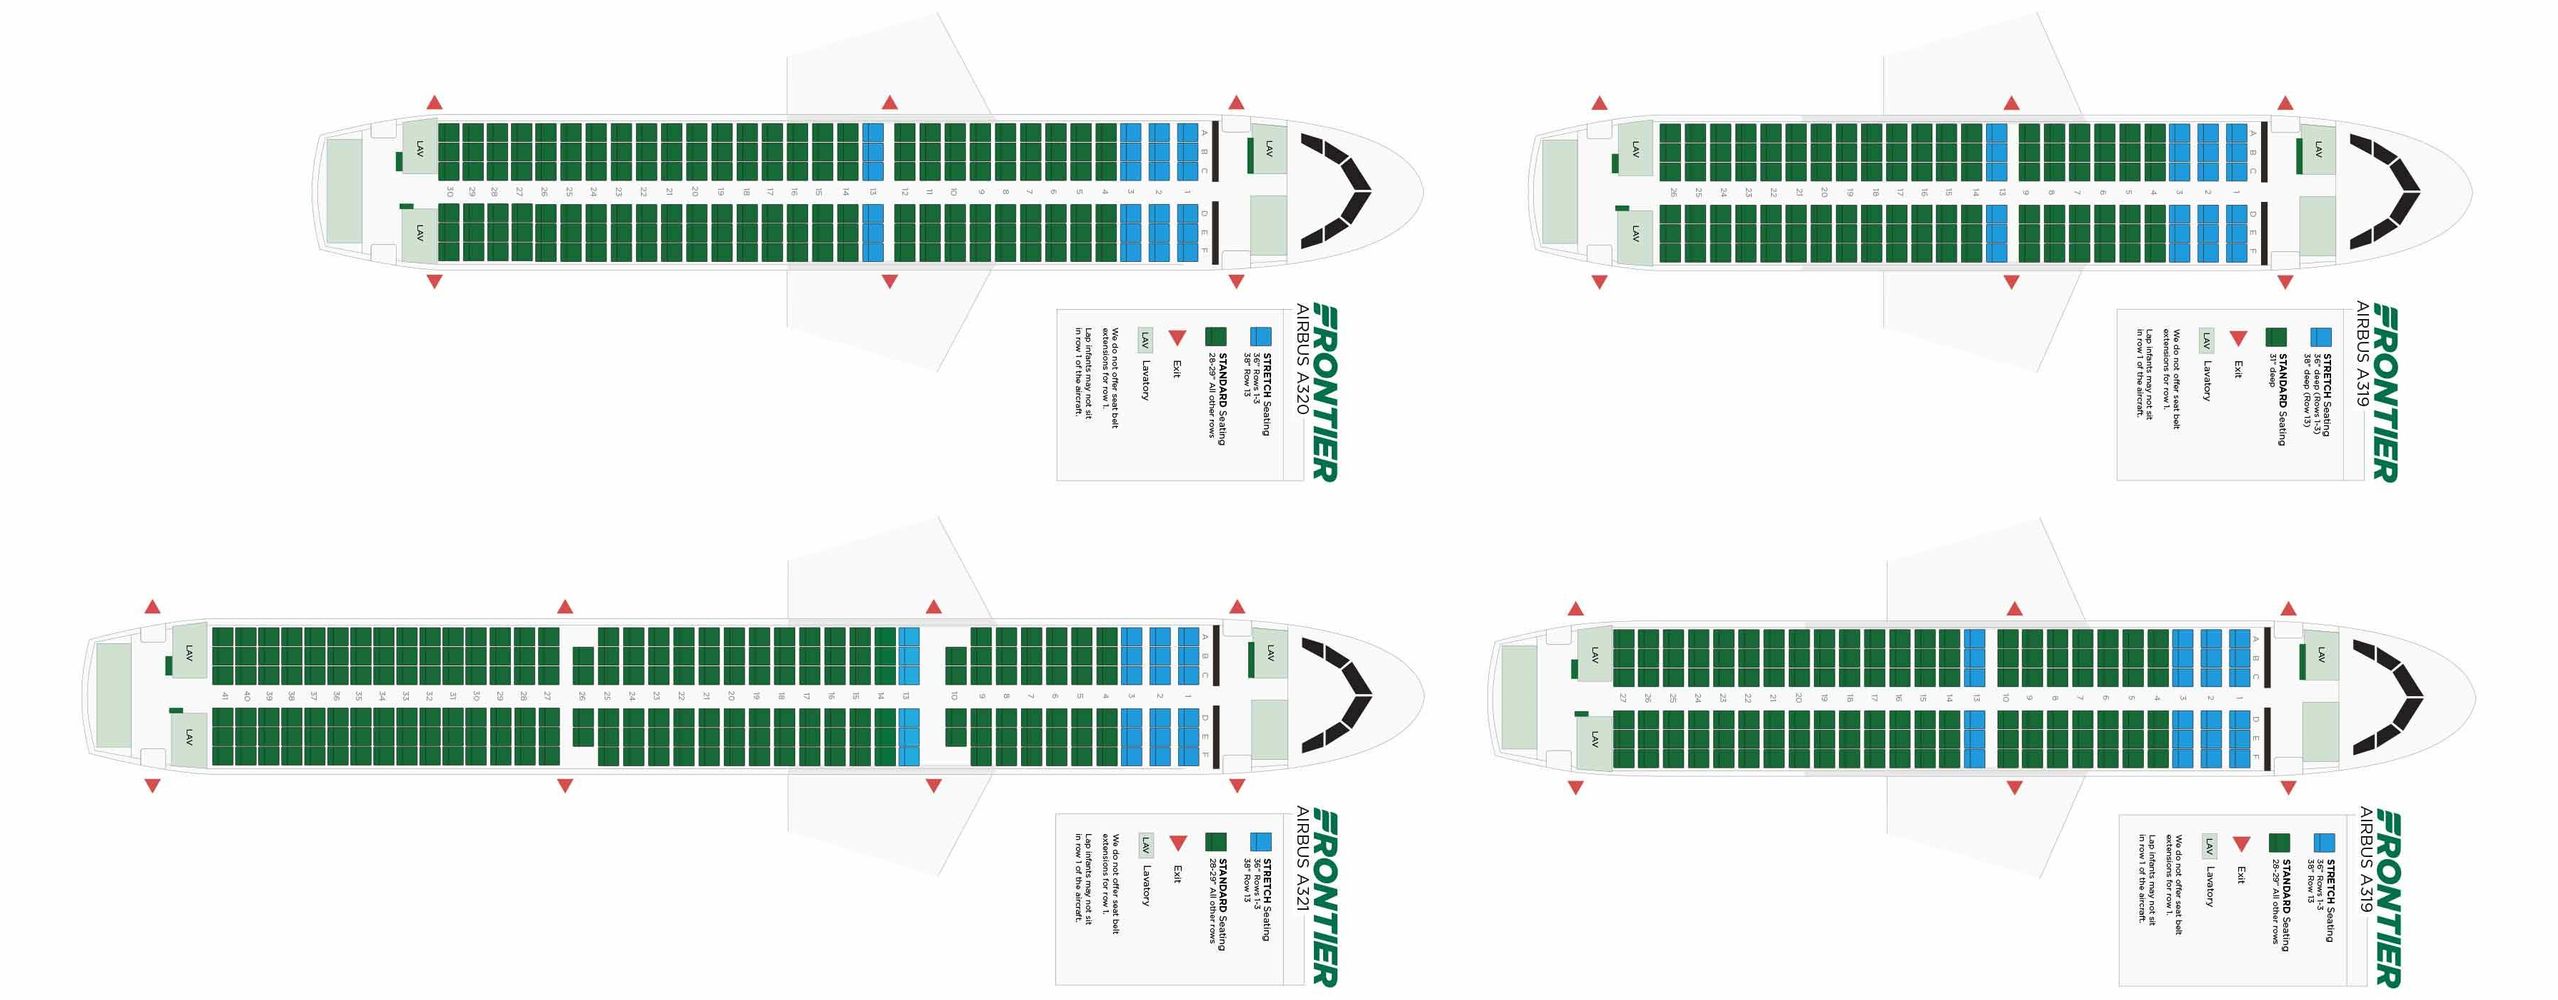 Frontier Plane Seating Chart Are Frontier's Stretch Seats Worth The Money?